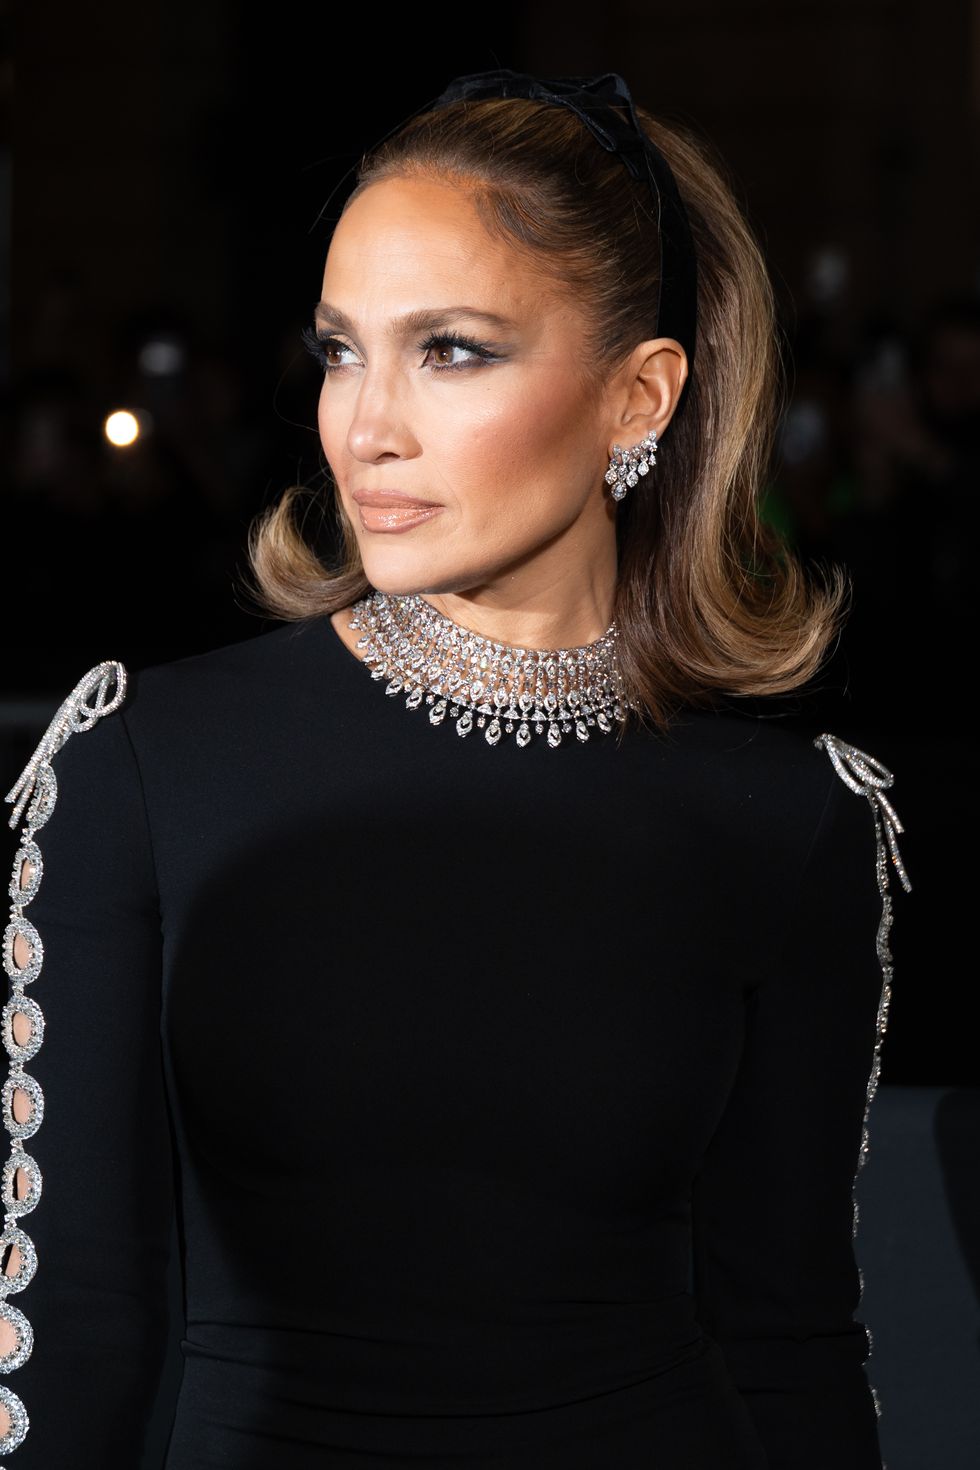 JLo channels Jackie Kennedy with stunning 'old money' bob